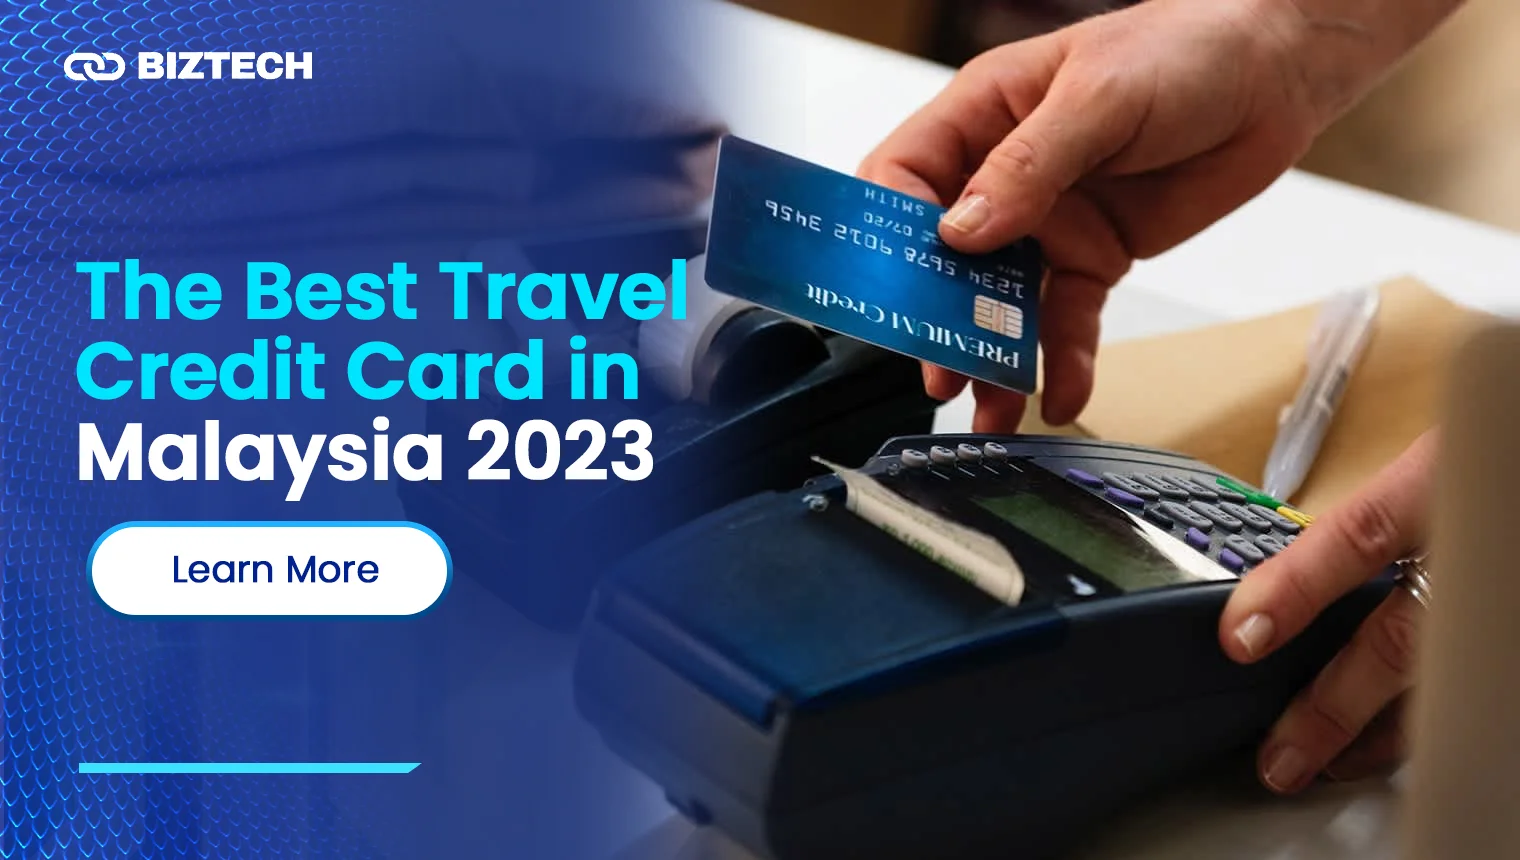 The Best Travel Credit Cards in Malaysia 2023